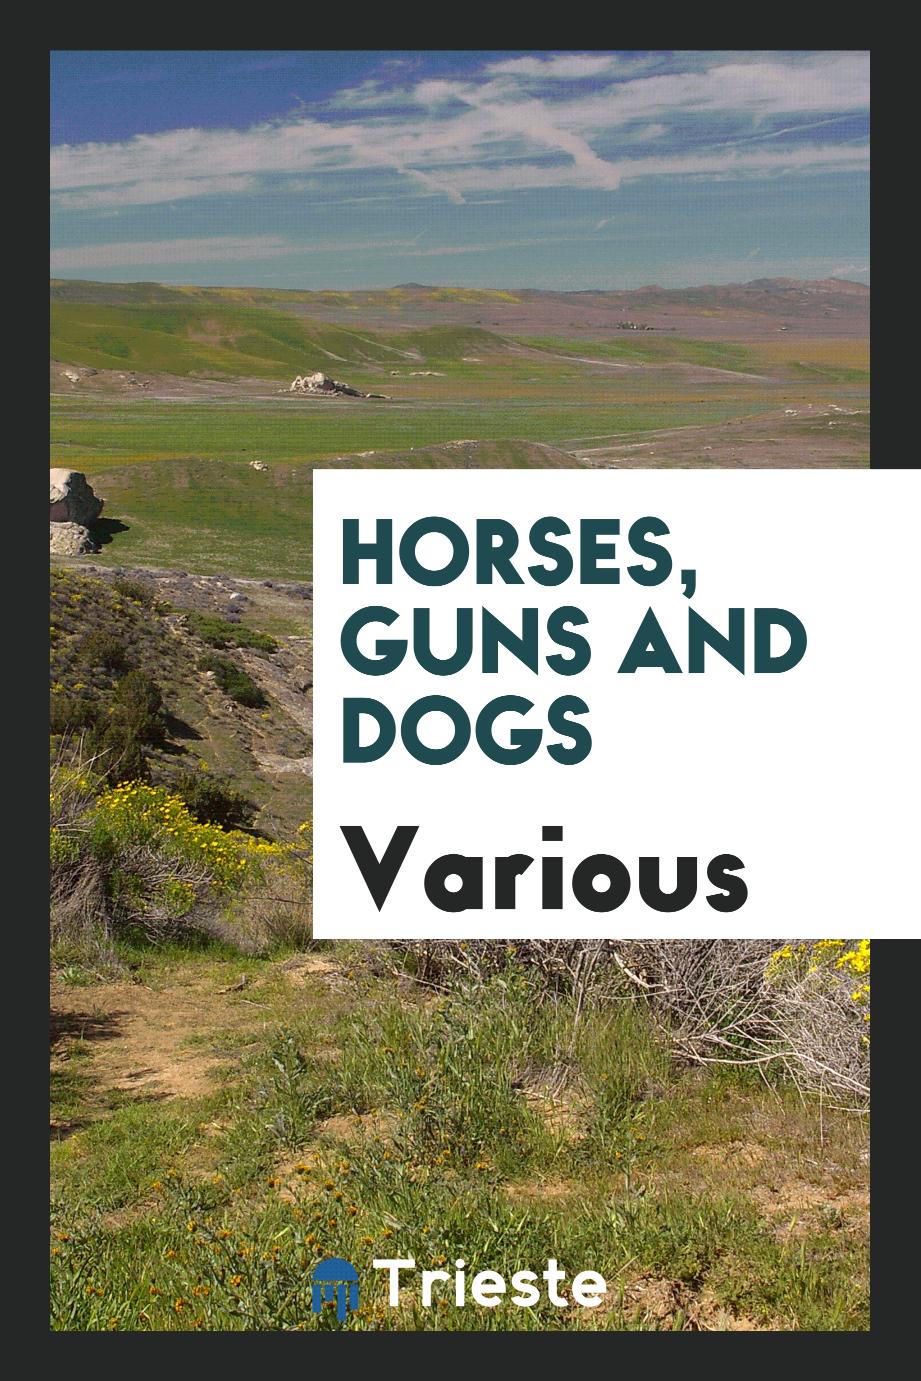 Horses, guns and dogs